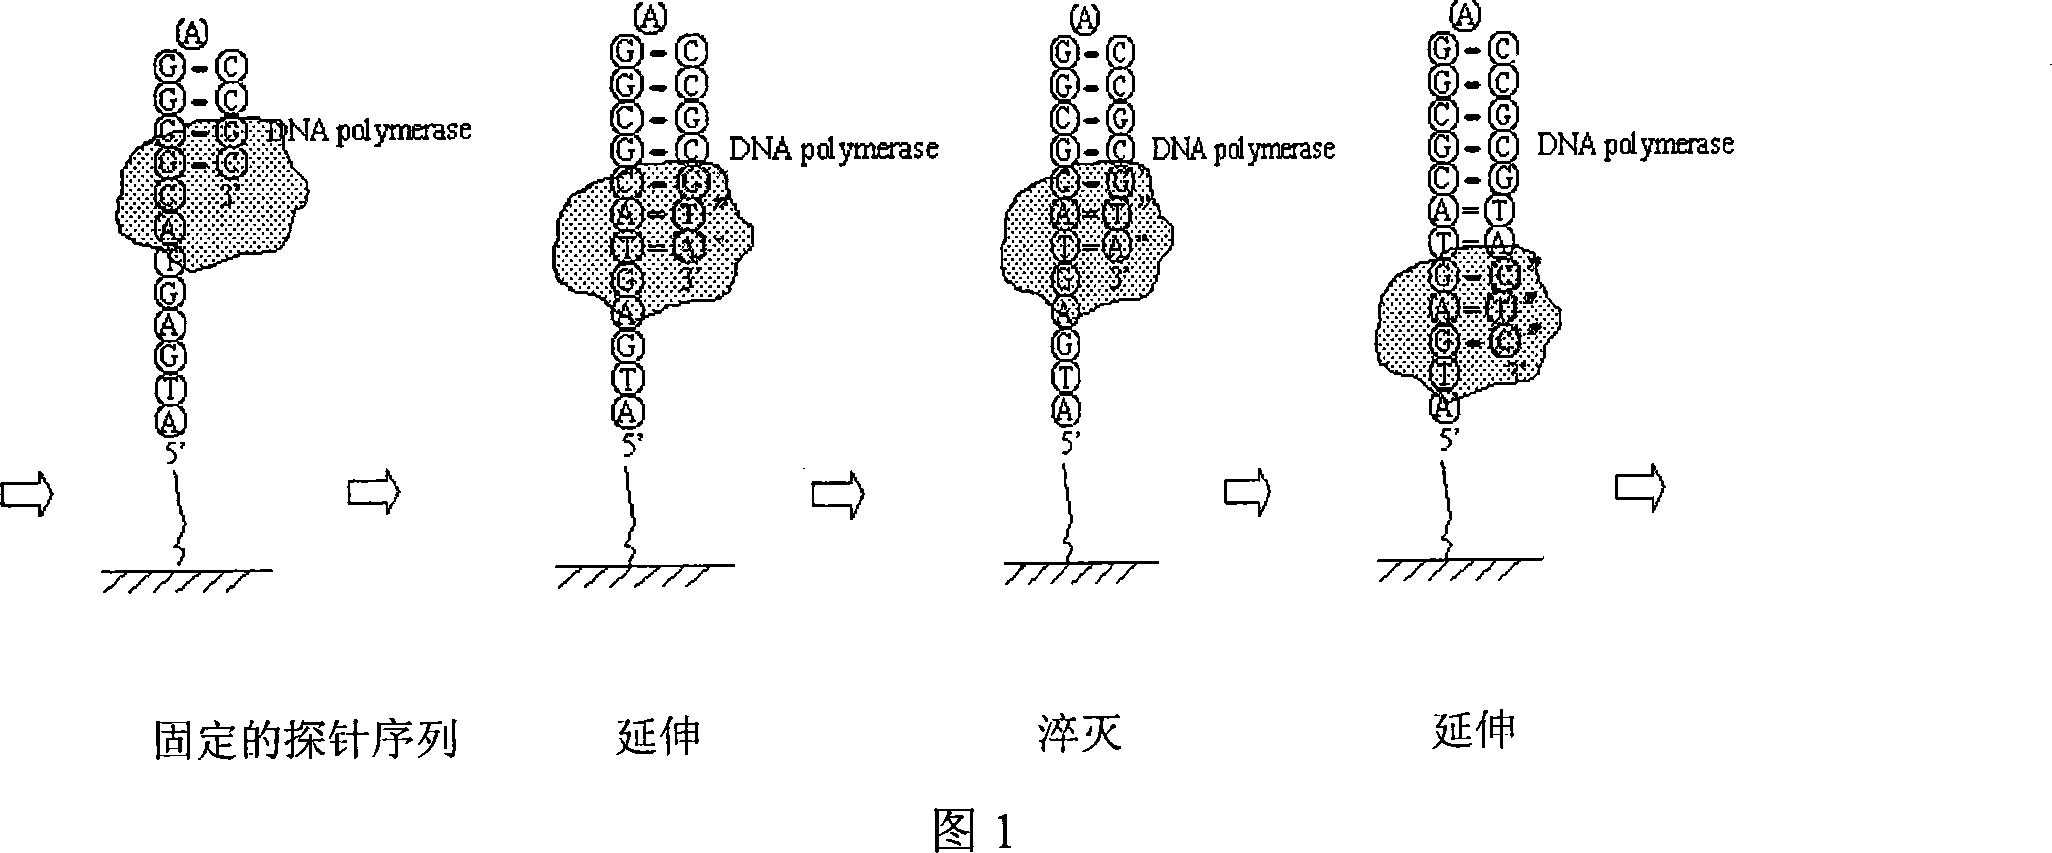 Nucleic acid sequencing method based on fluorescence quenching